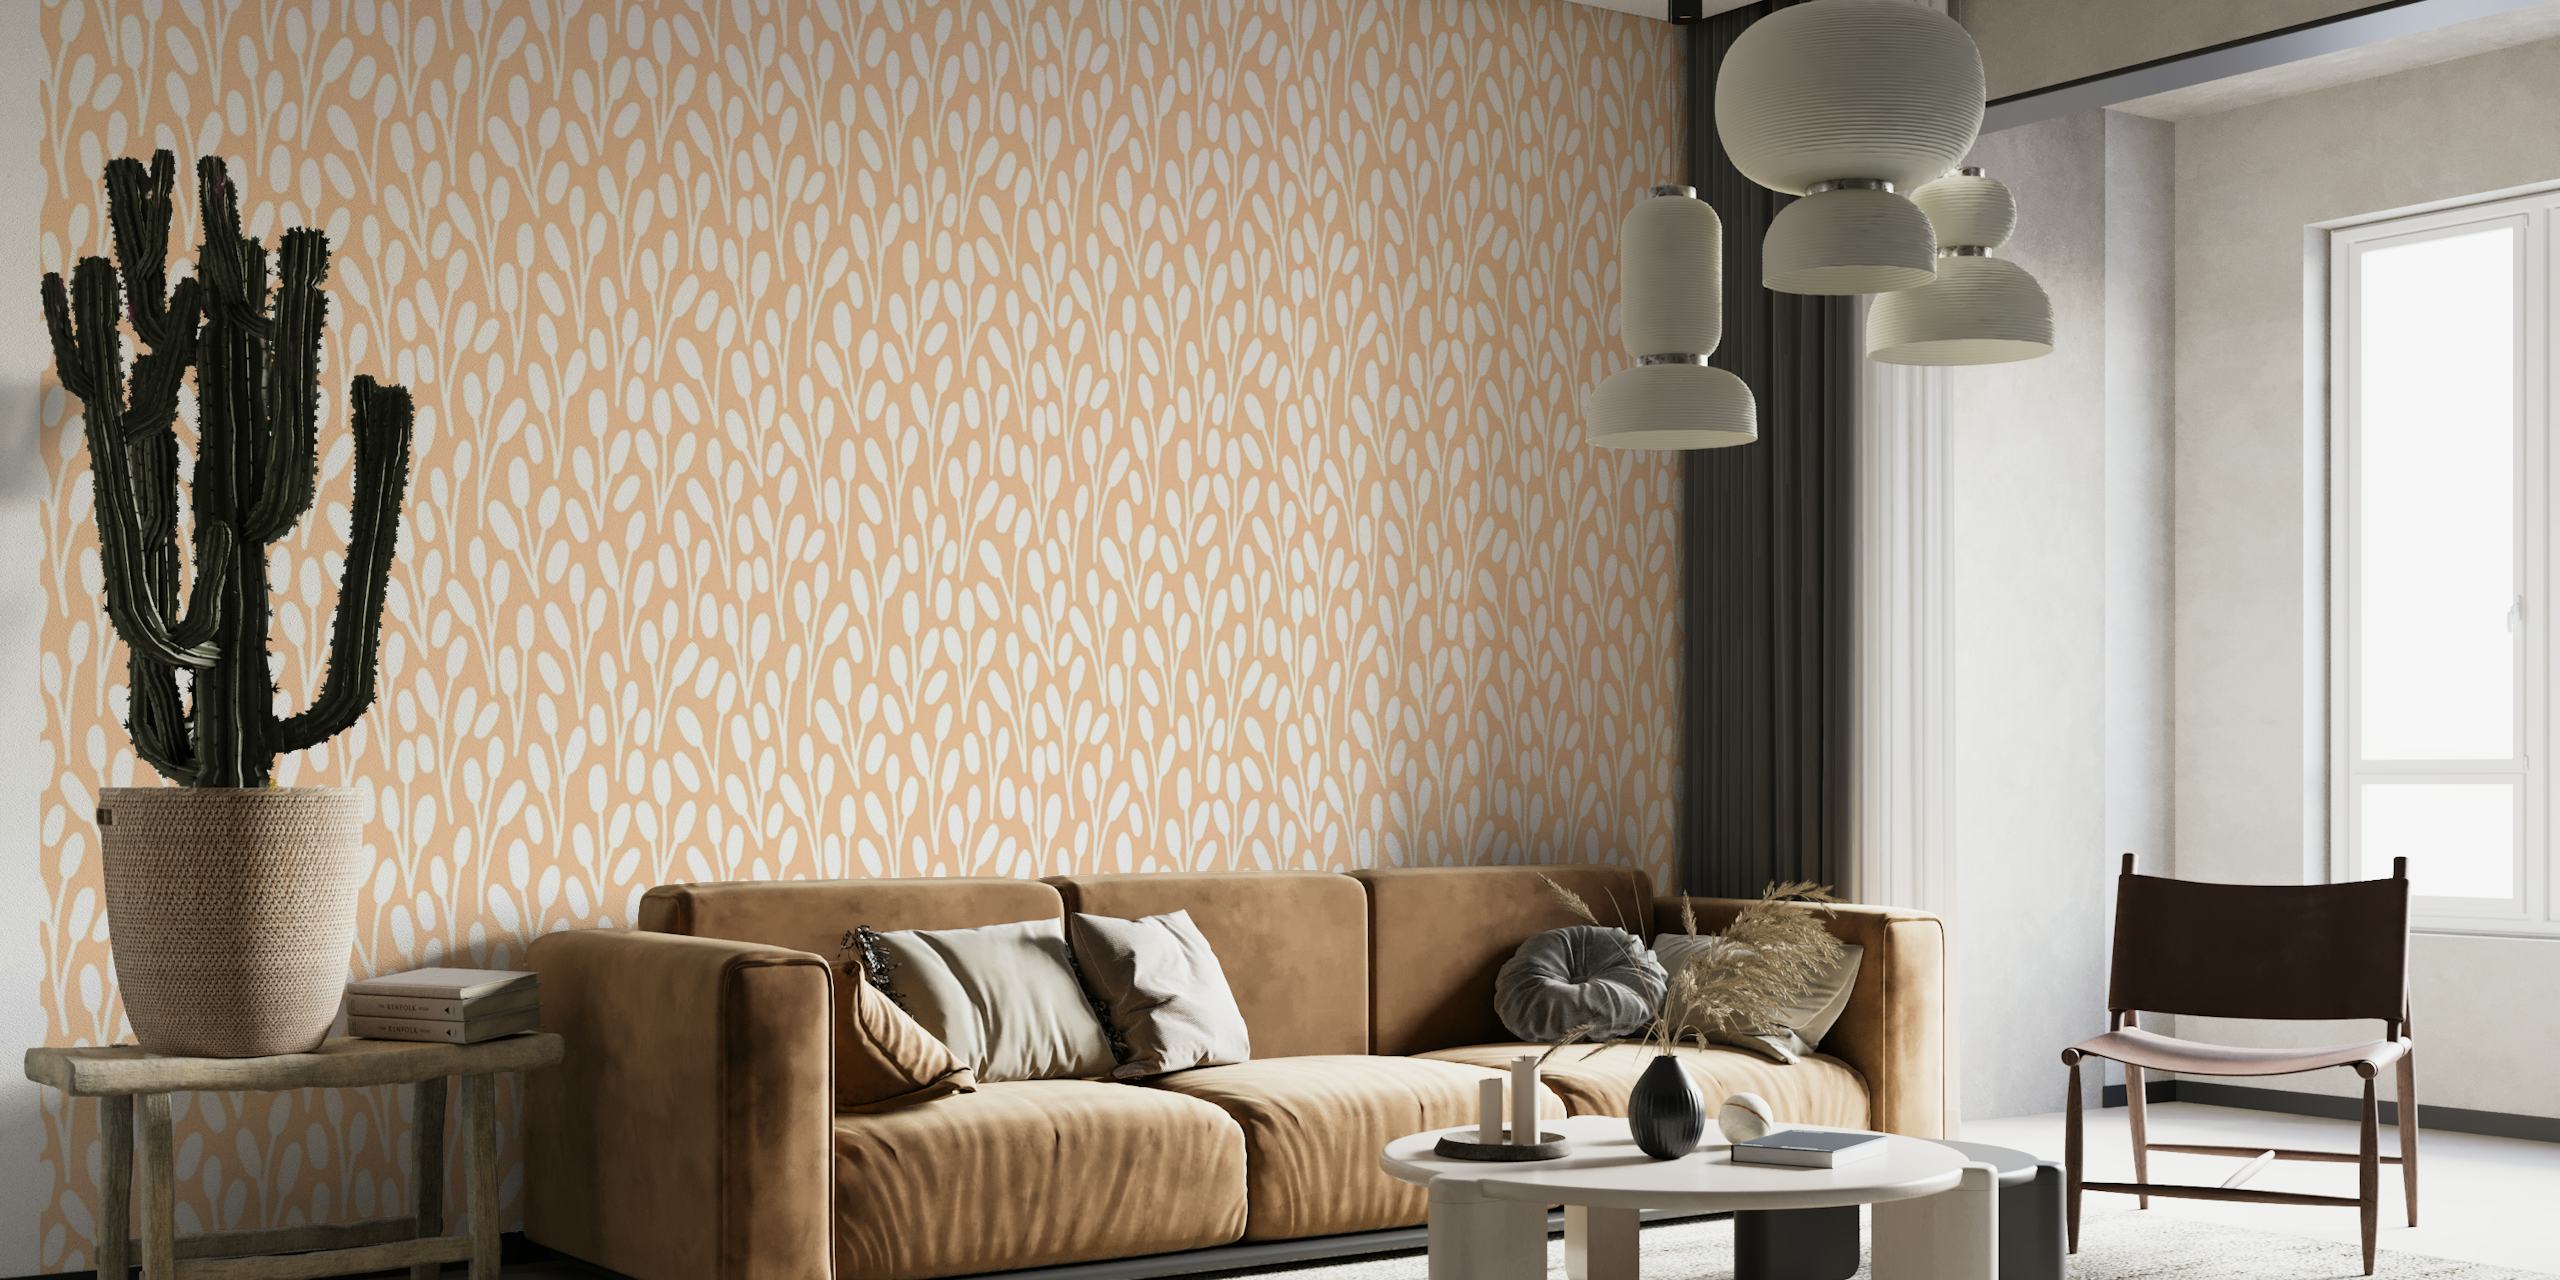 Warm orange reed pattern wall mural for interior decoration.